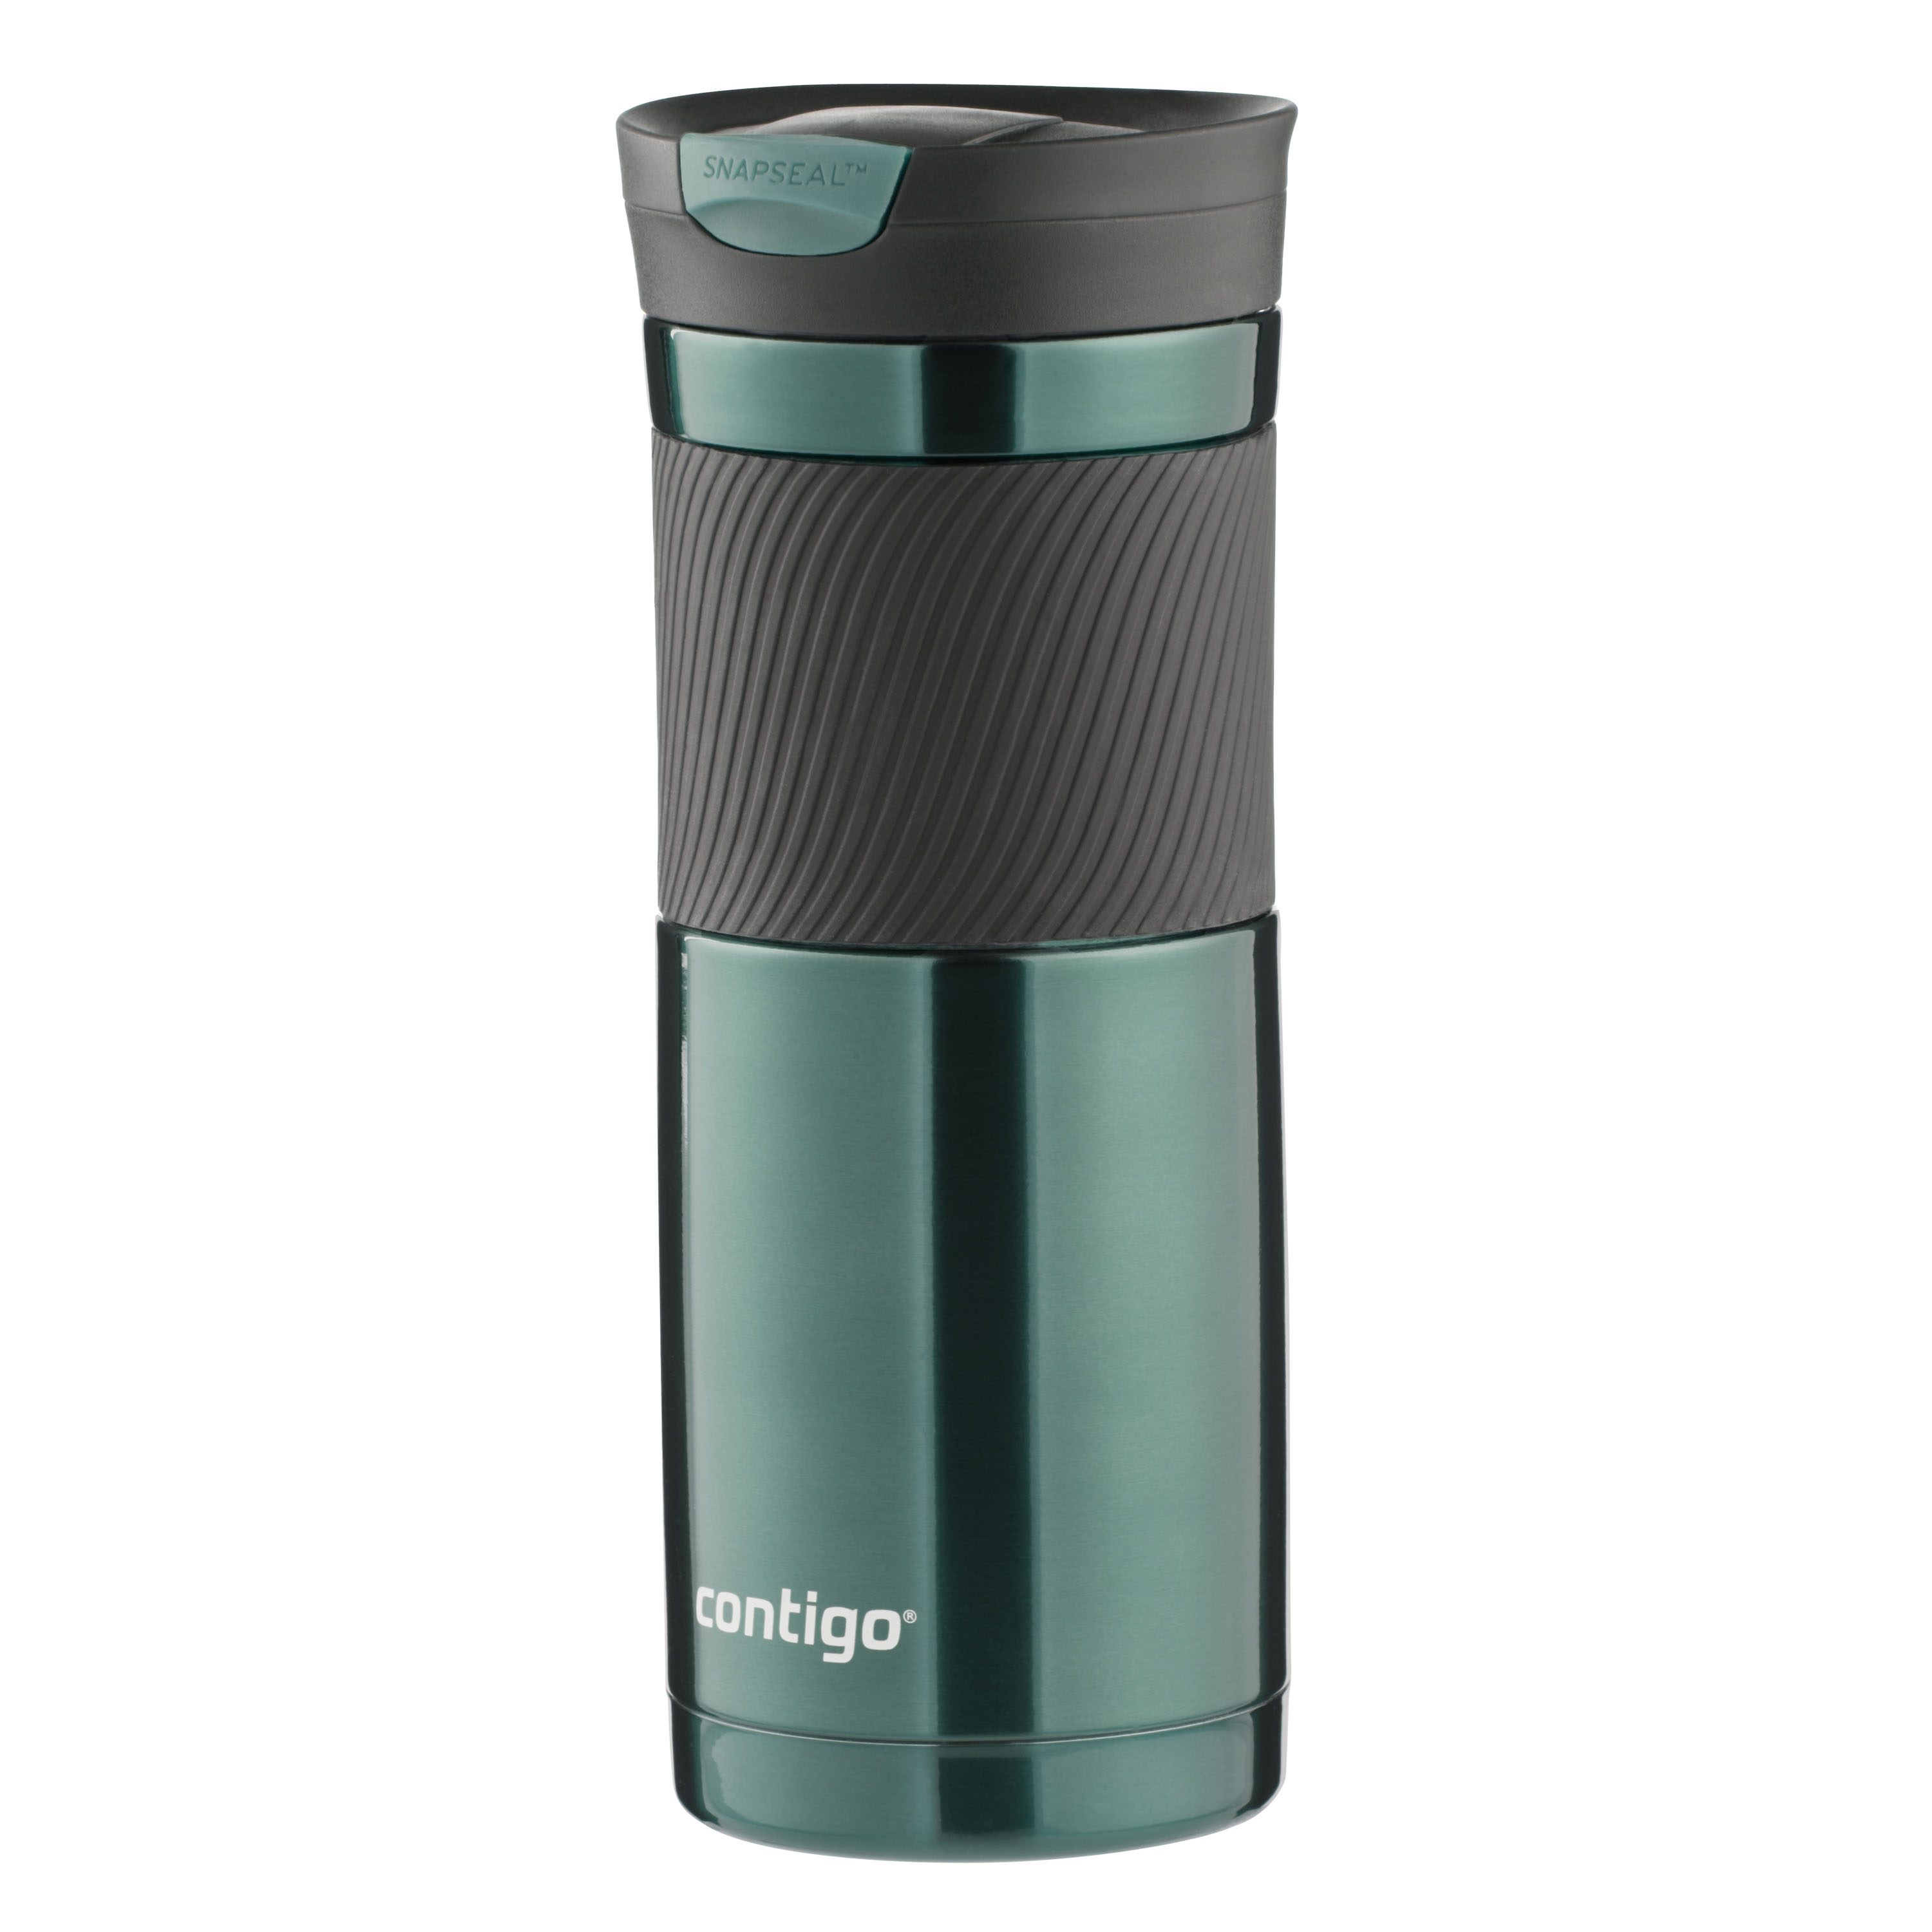 Contigo Byron Stainless Steel Travel Mug with SNAPSEAL Lid and Grip Grayed Jade, 20 fl oz. - image 3 of 5